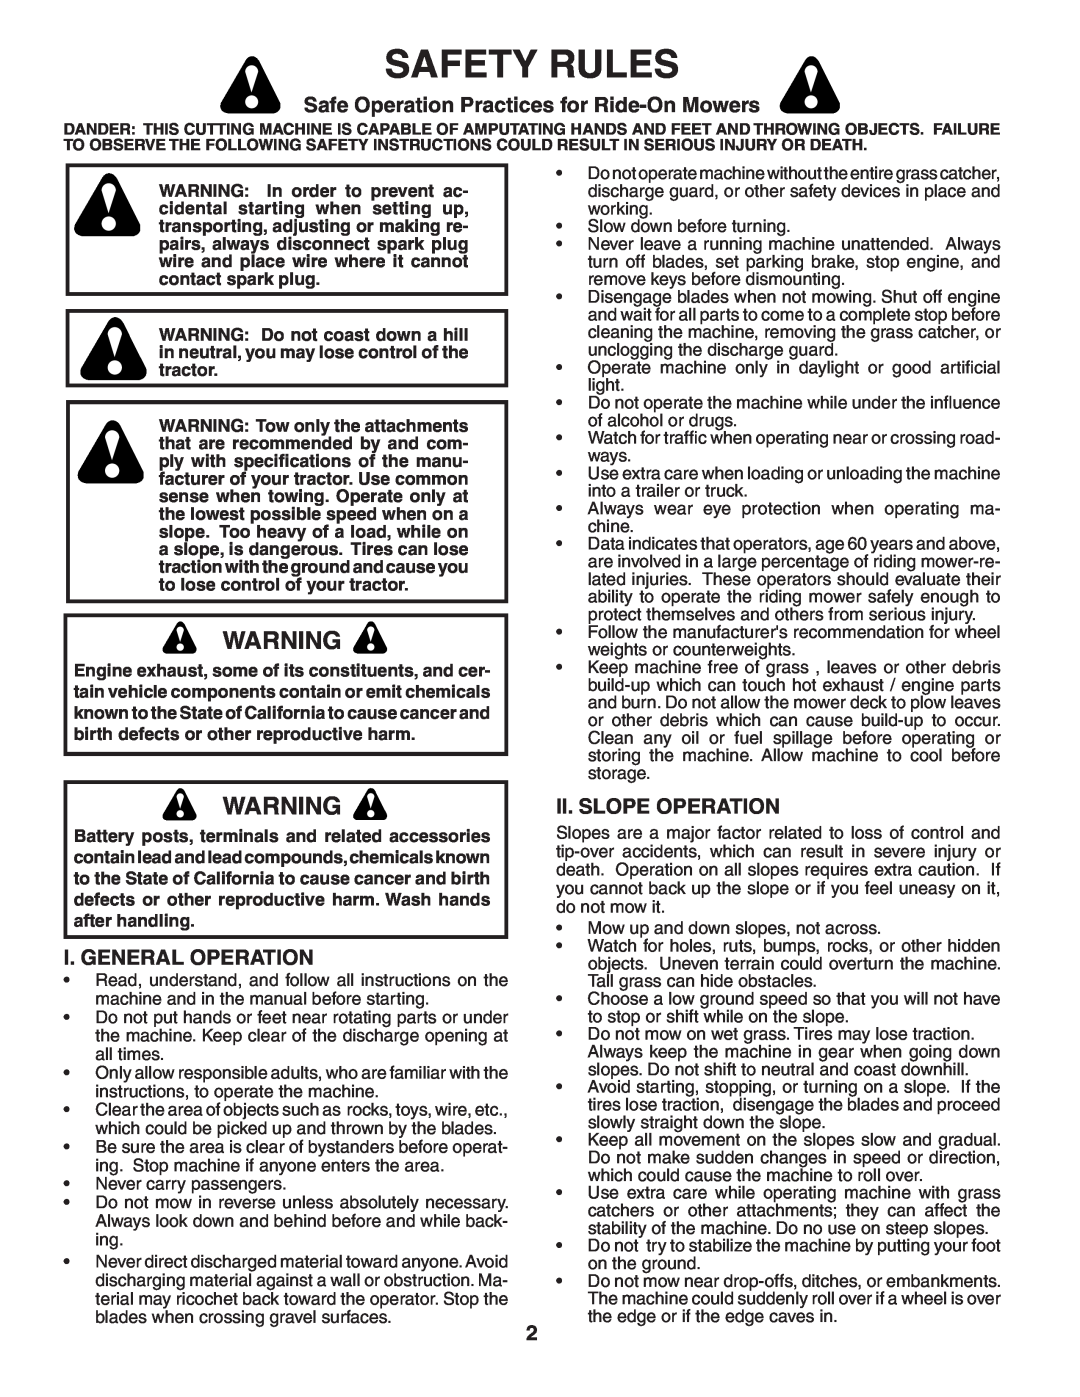 Husqvarna YTH2348 Safety Rules, Safe Operation Practices for Ride-OnMowers, I. General Operation, Ii. Slope Operation 